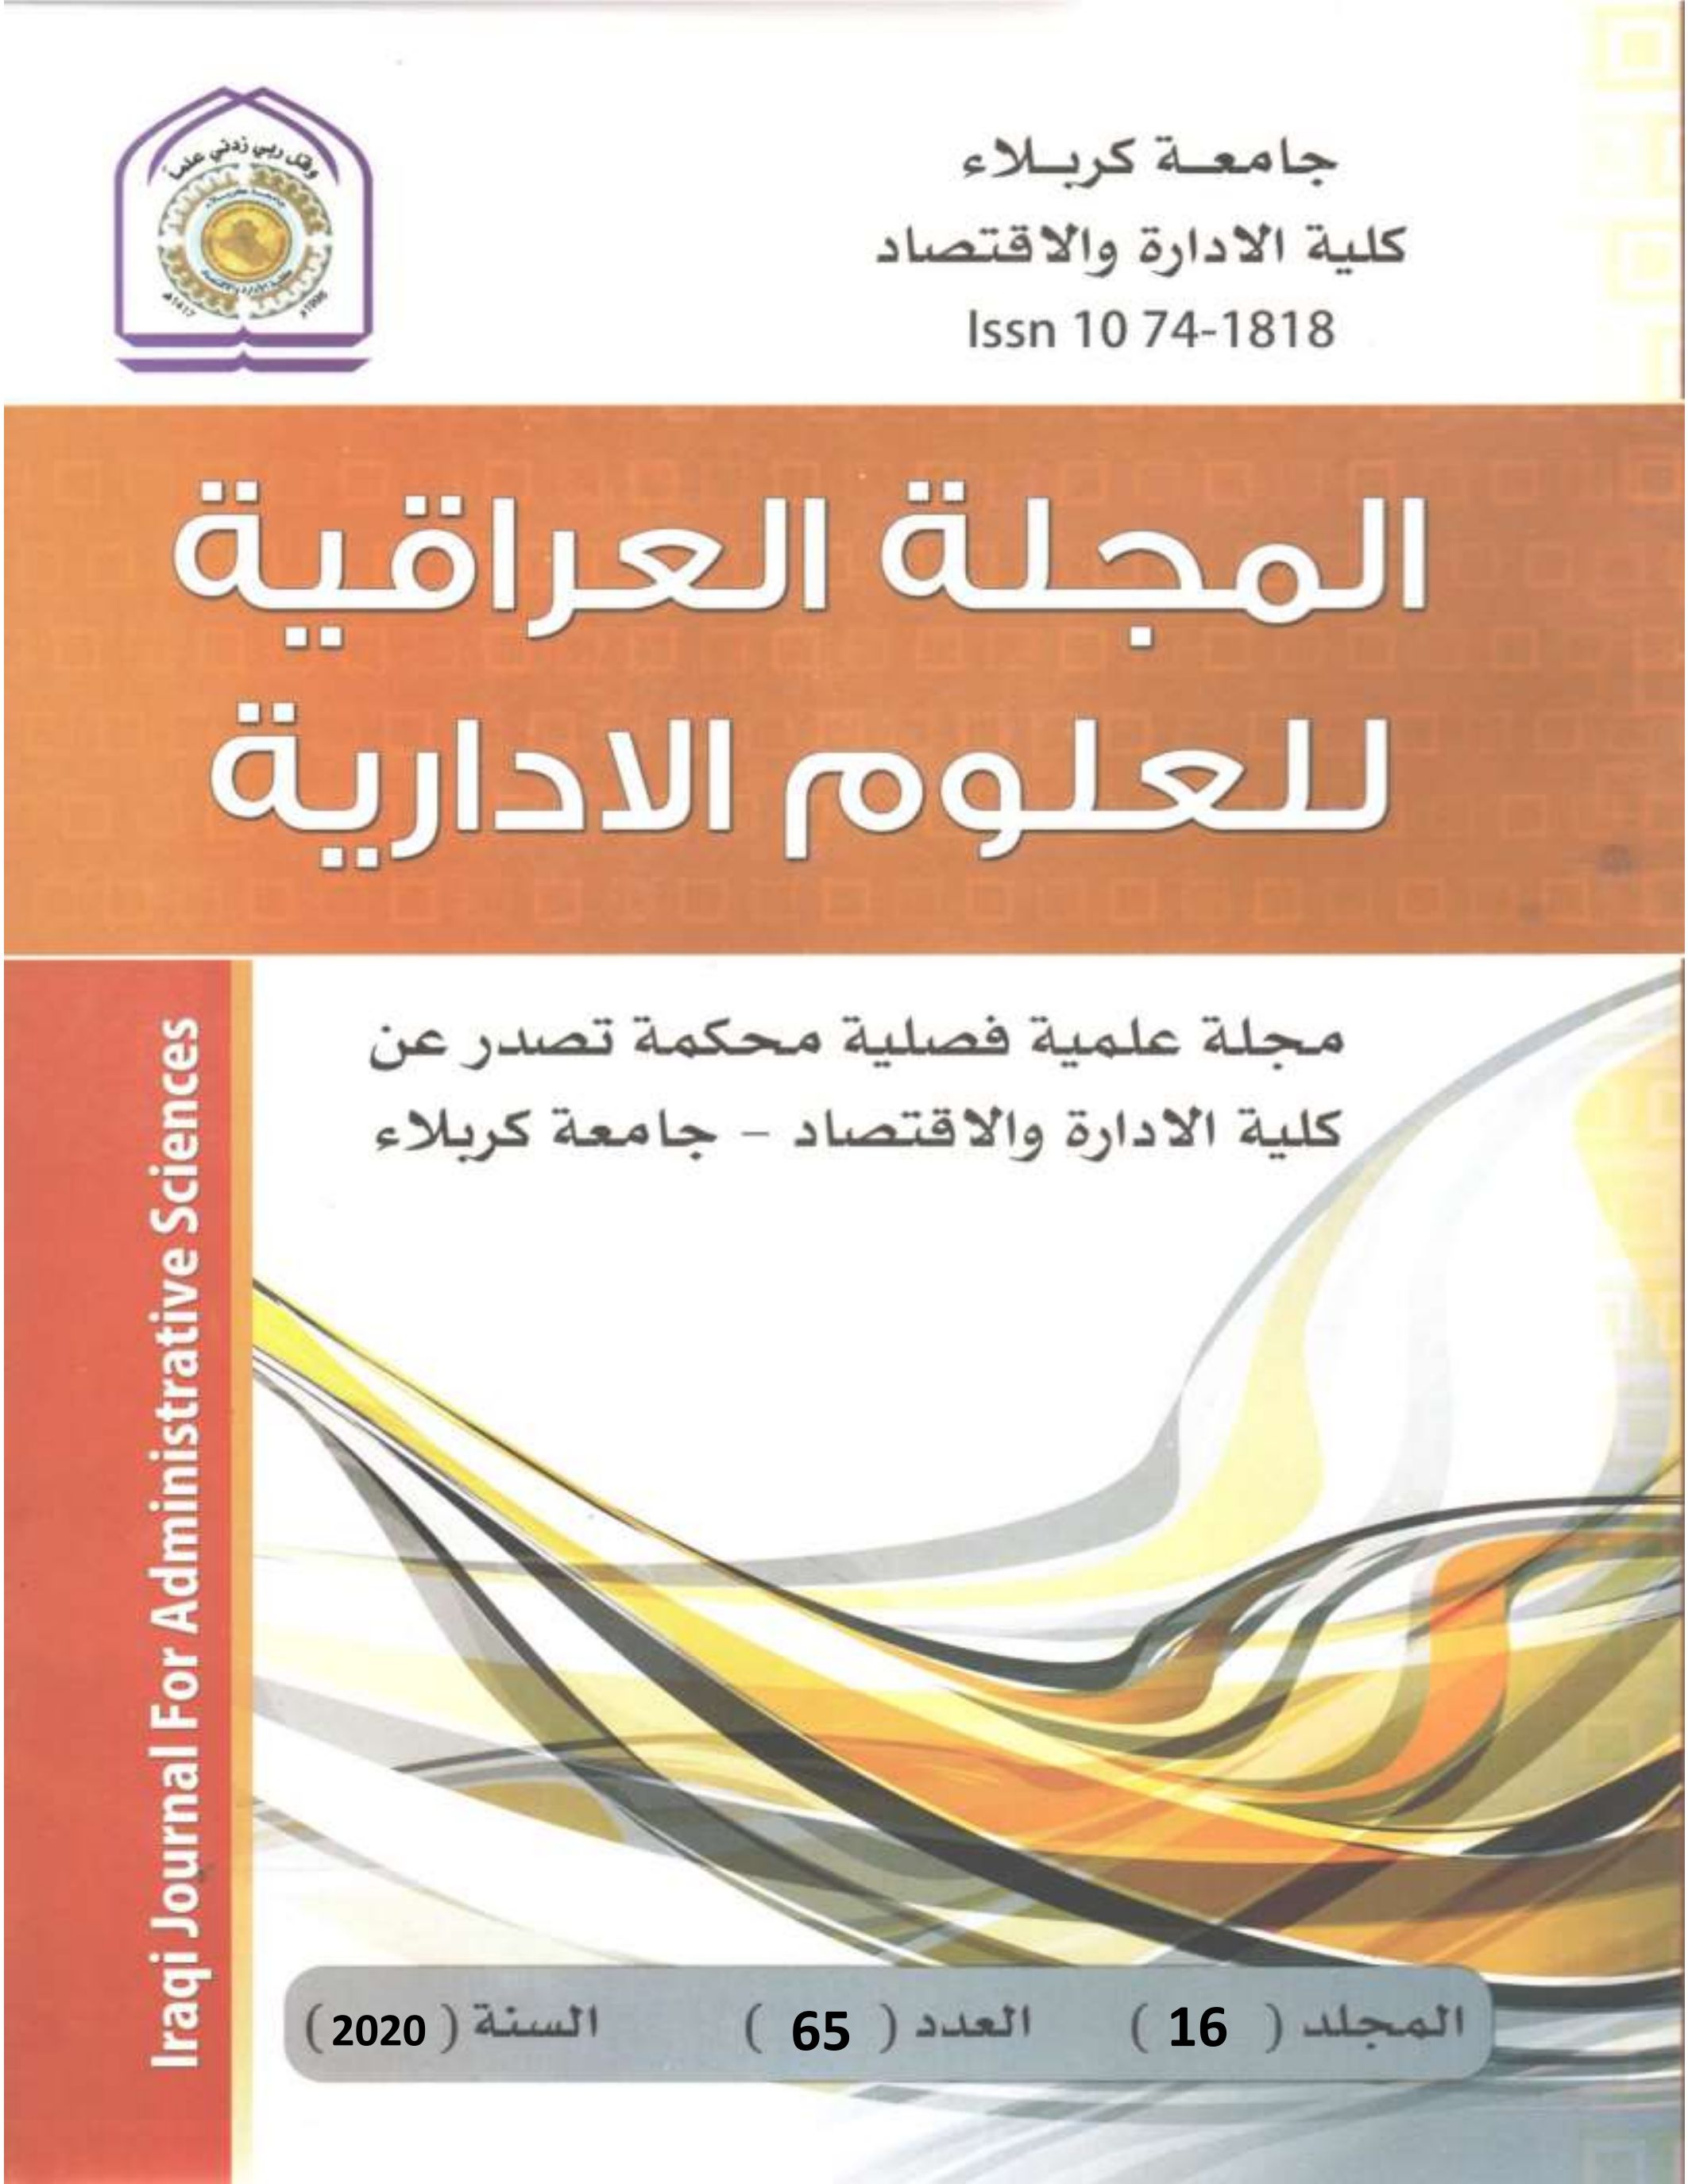 					View Vol. 16 No. 65 (2020): Iraqi Journal for Administrative Sciences
				